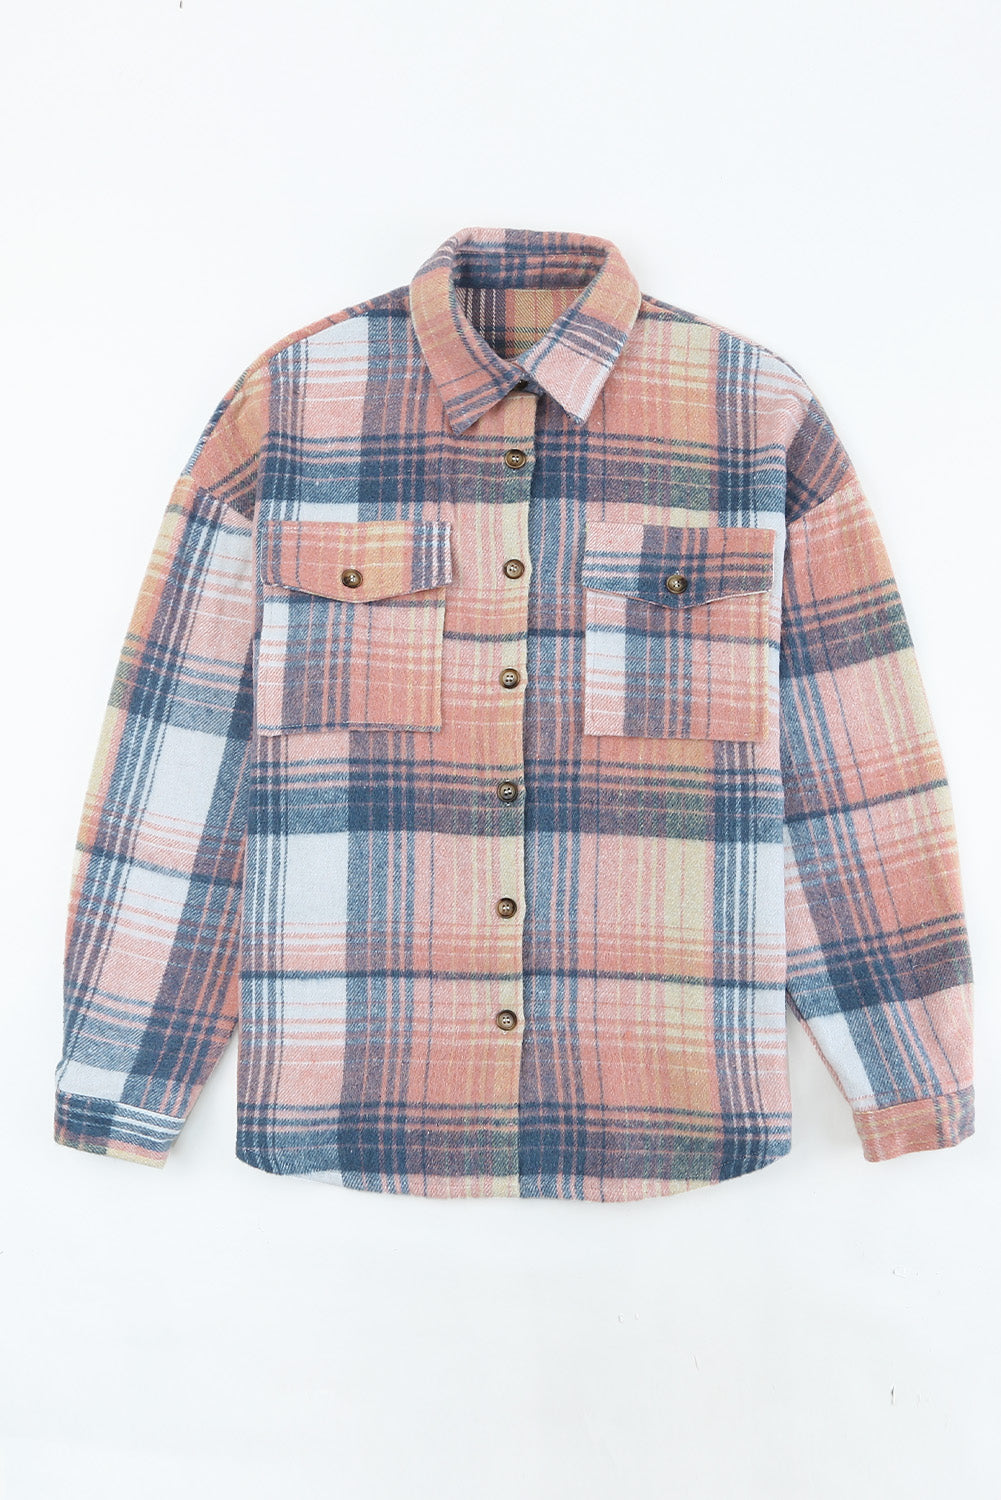 Pink & Grey Plaid Button Up Collared Flannel Shacket